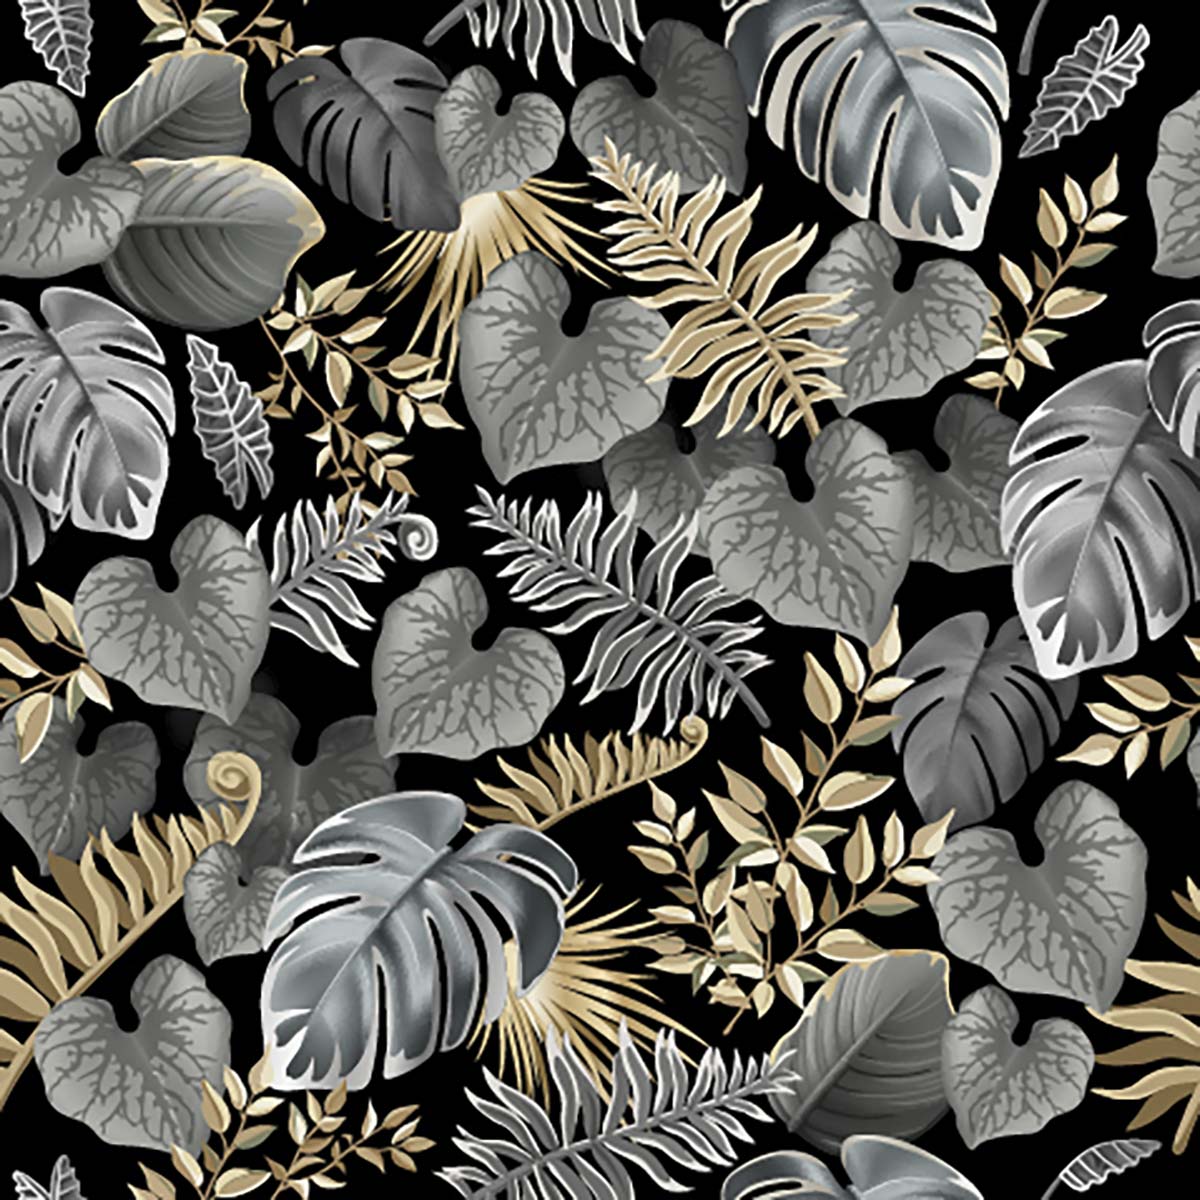 A pattern of leaves on a black background